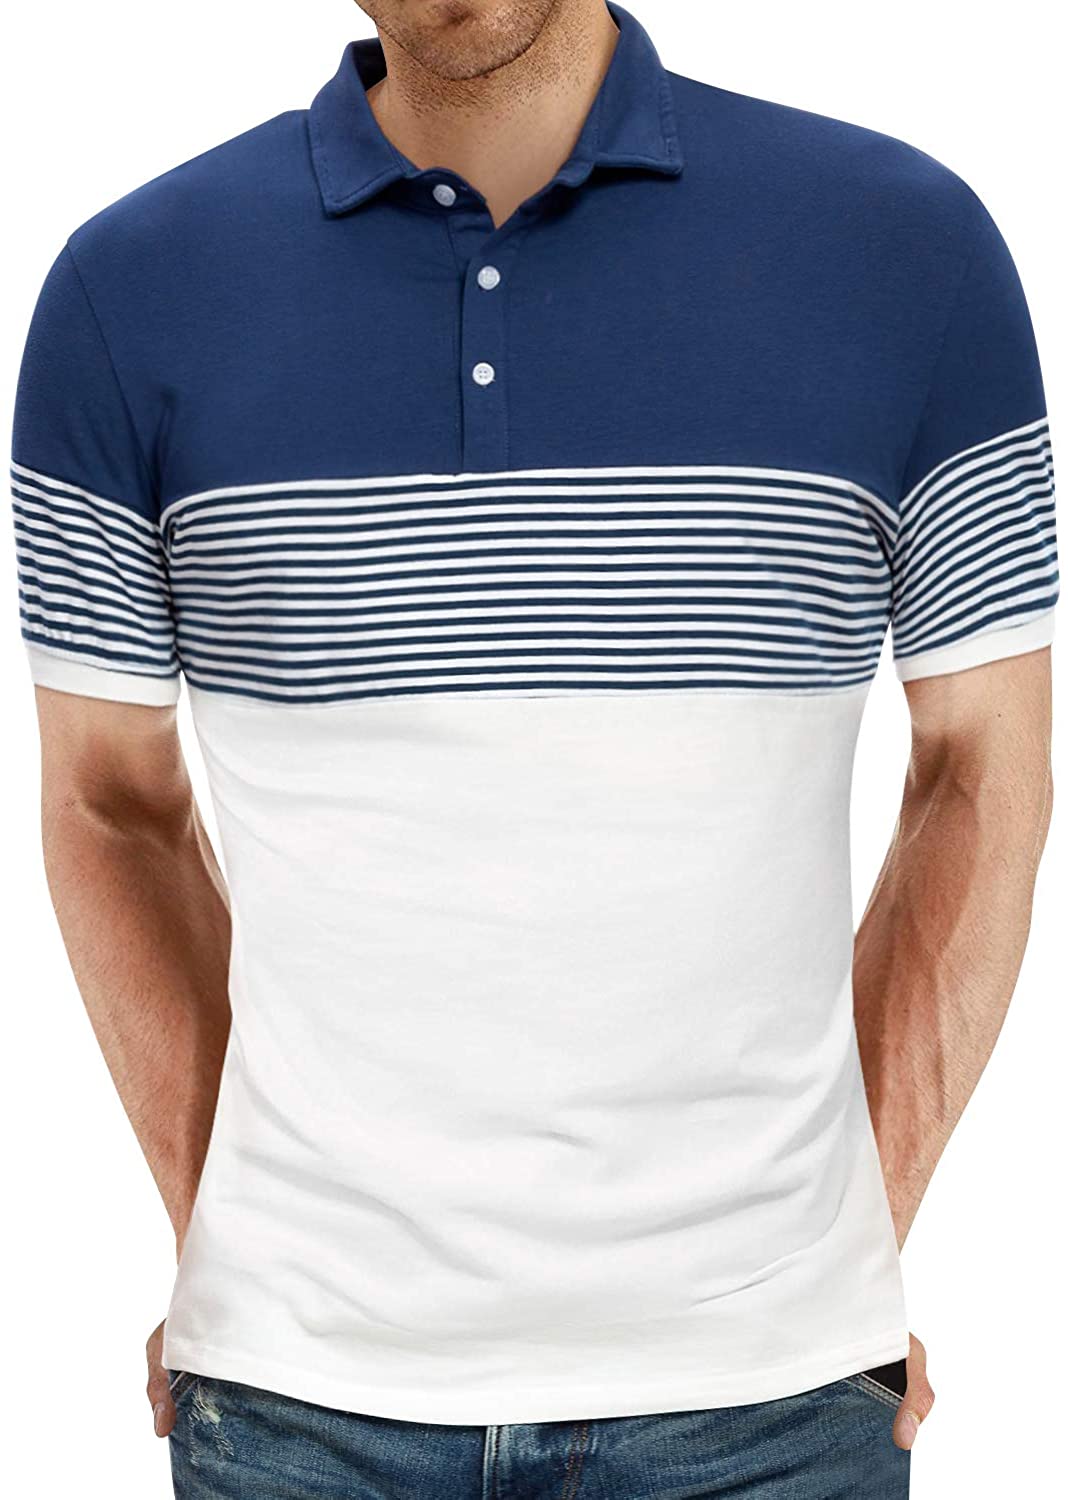 YTD Men's Short/Long Sleeve Polo Shirts Casual Slim Fit Contrast Color ...